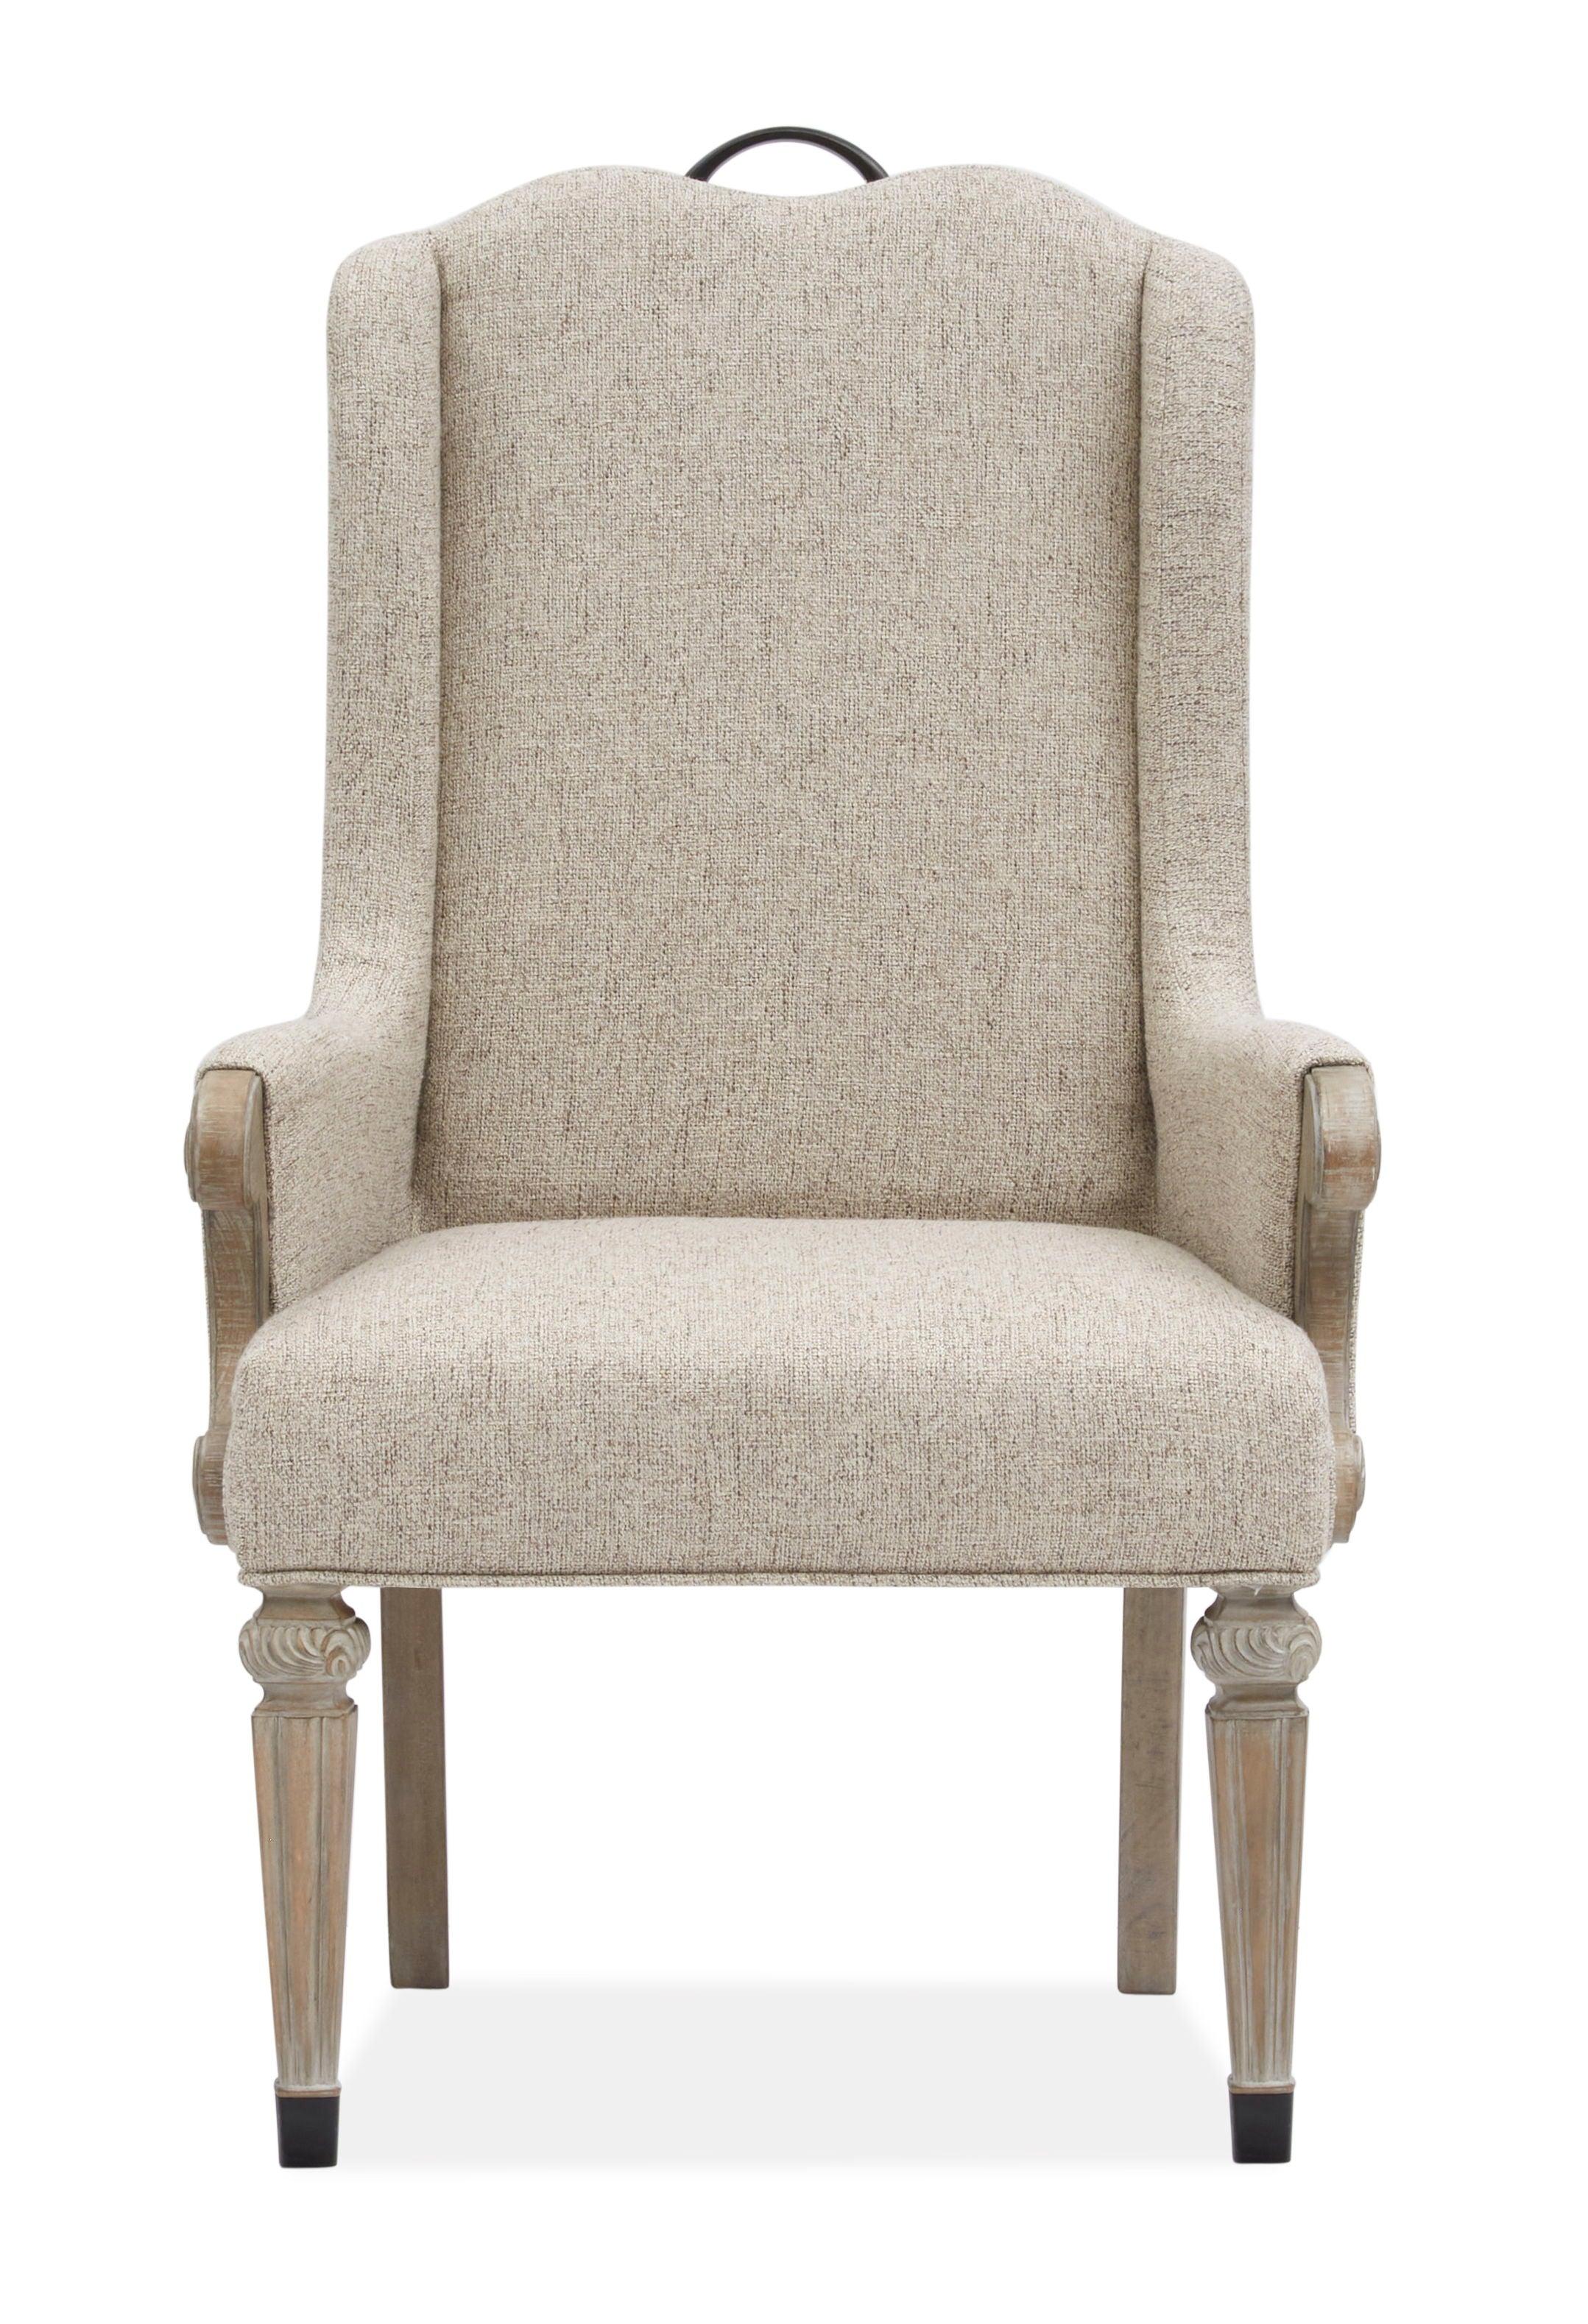 Magnussen Furniture - Marisol - Upholstered Host Arm Chair (Set of 2) - Fawn - 5th Avenue Furniture